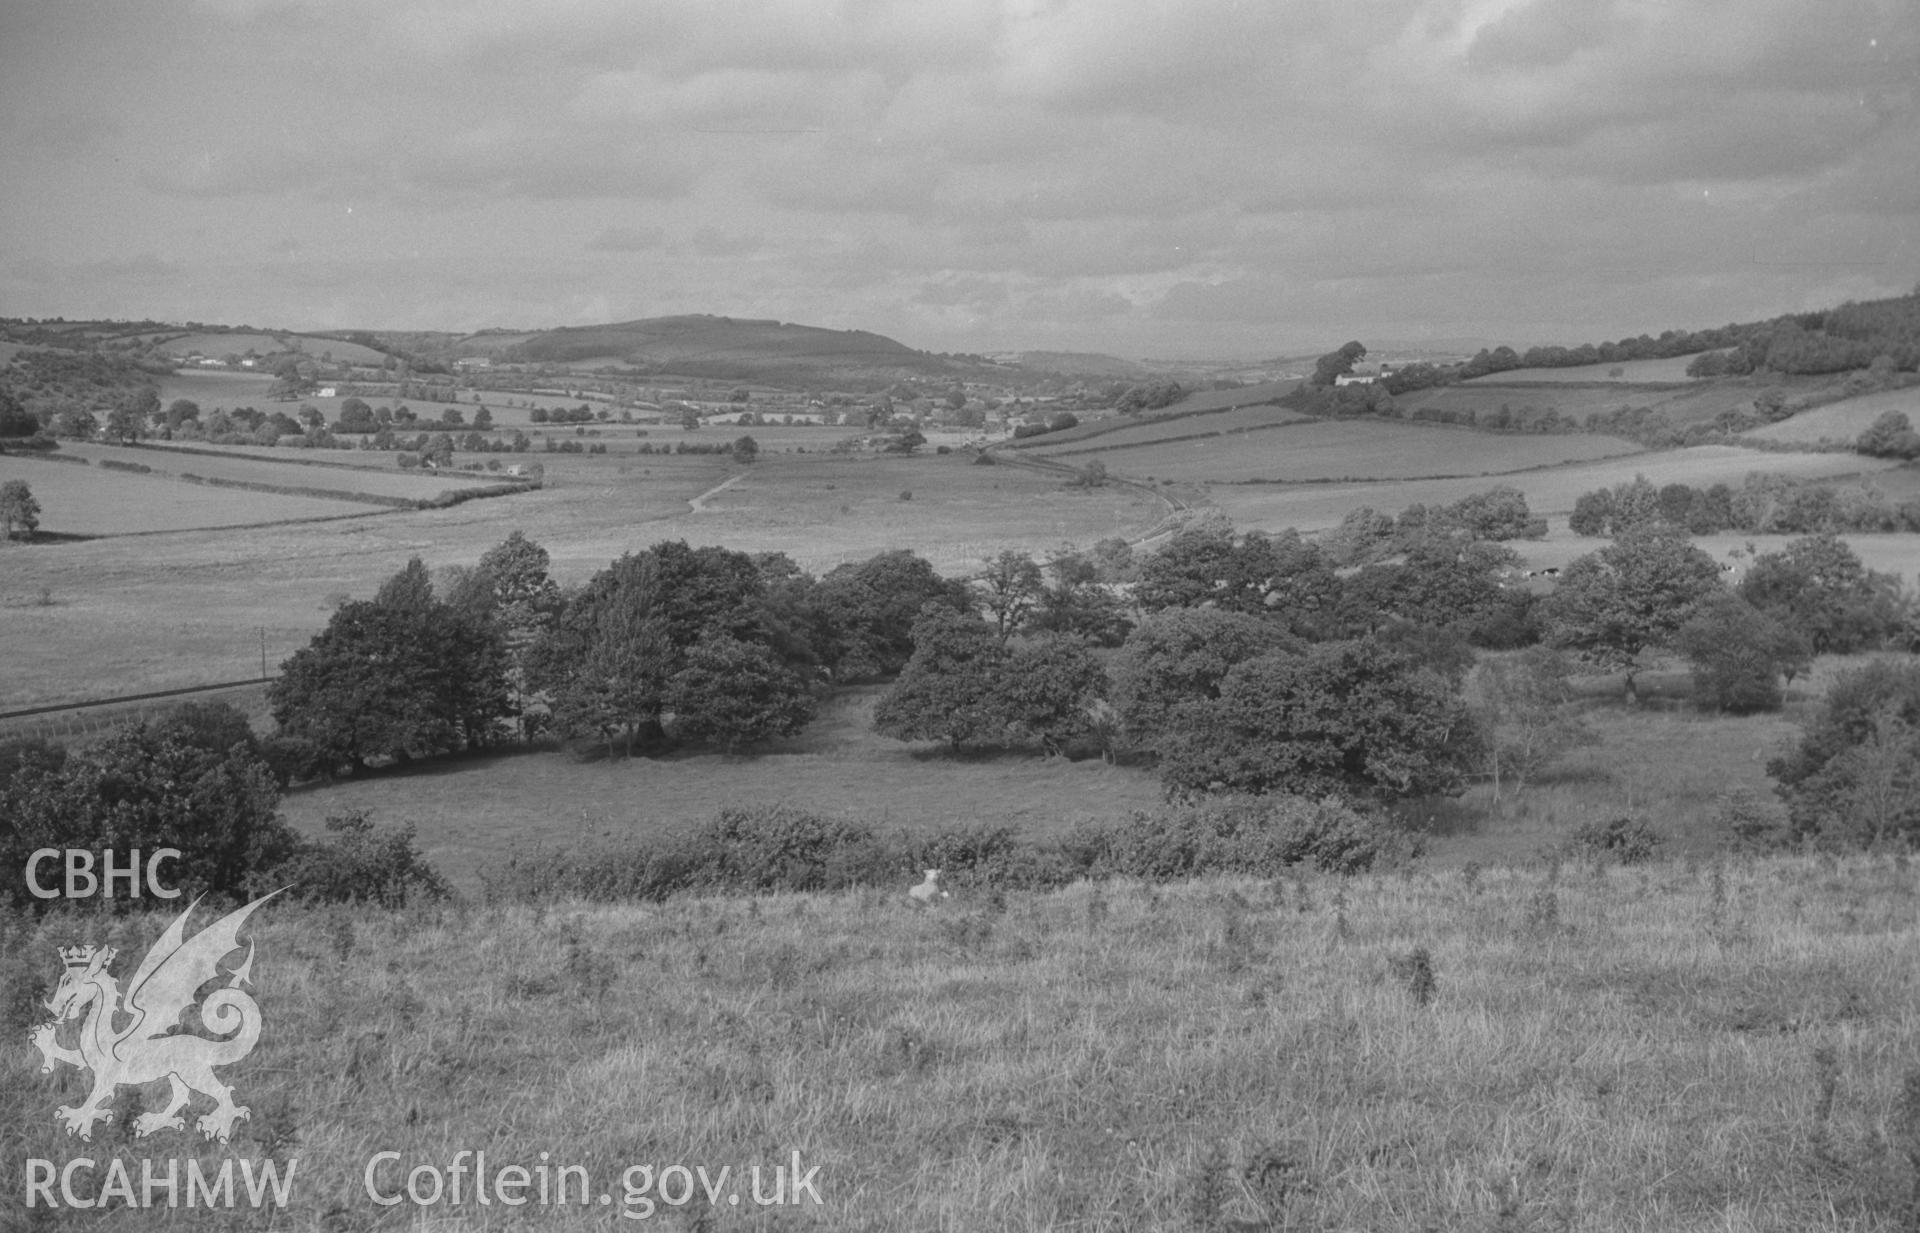 Digital copy of a black and white negative showing panoramic view of Glan Denys, Derry Ormond Monument, Dulas valley and woods by Castell Goetre. Photographed by Arthur O. Chater on 4th September 1966 from Grid Reference SN 591 505. (Photograph 2 of 6).